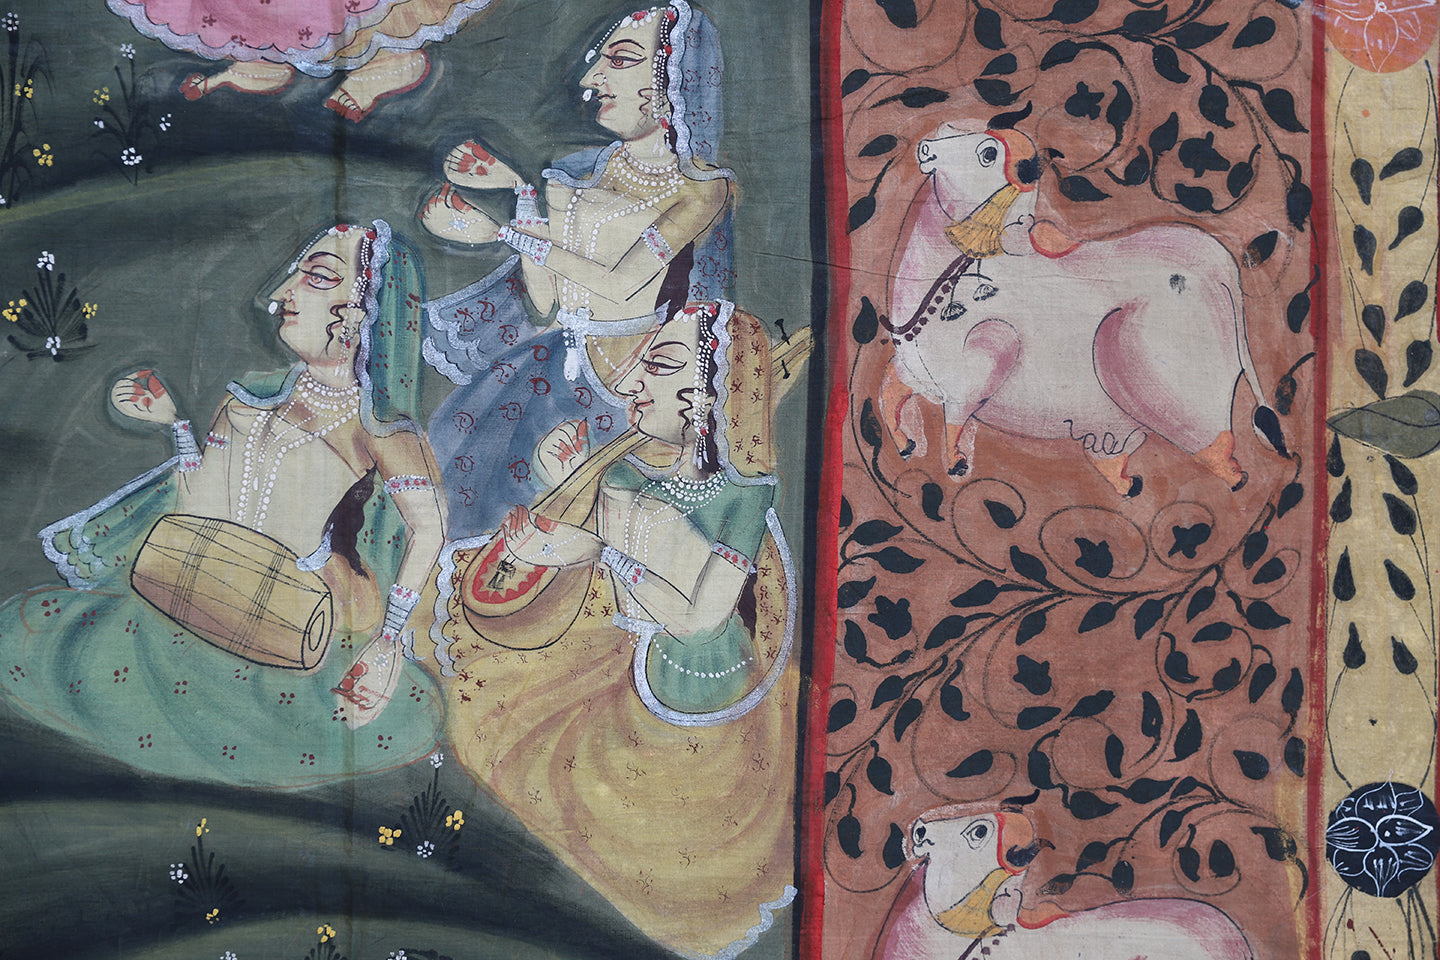 ANTIQUE PICHWAI PAINTING ON CLOTH FROM NATHDWARA RAJASTHAN